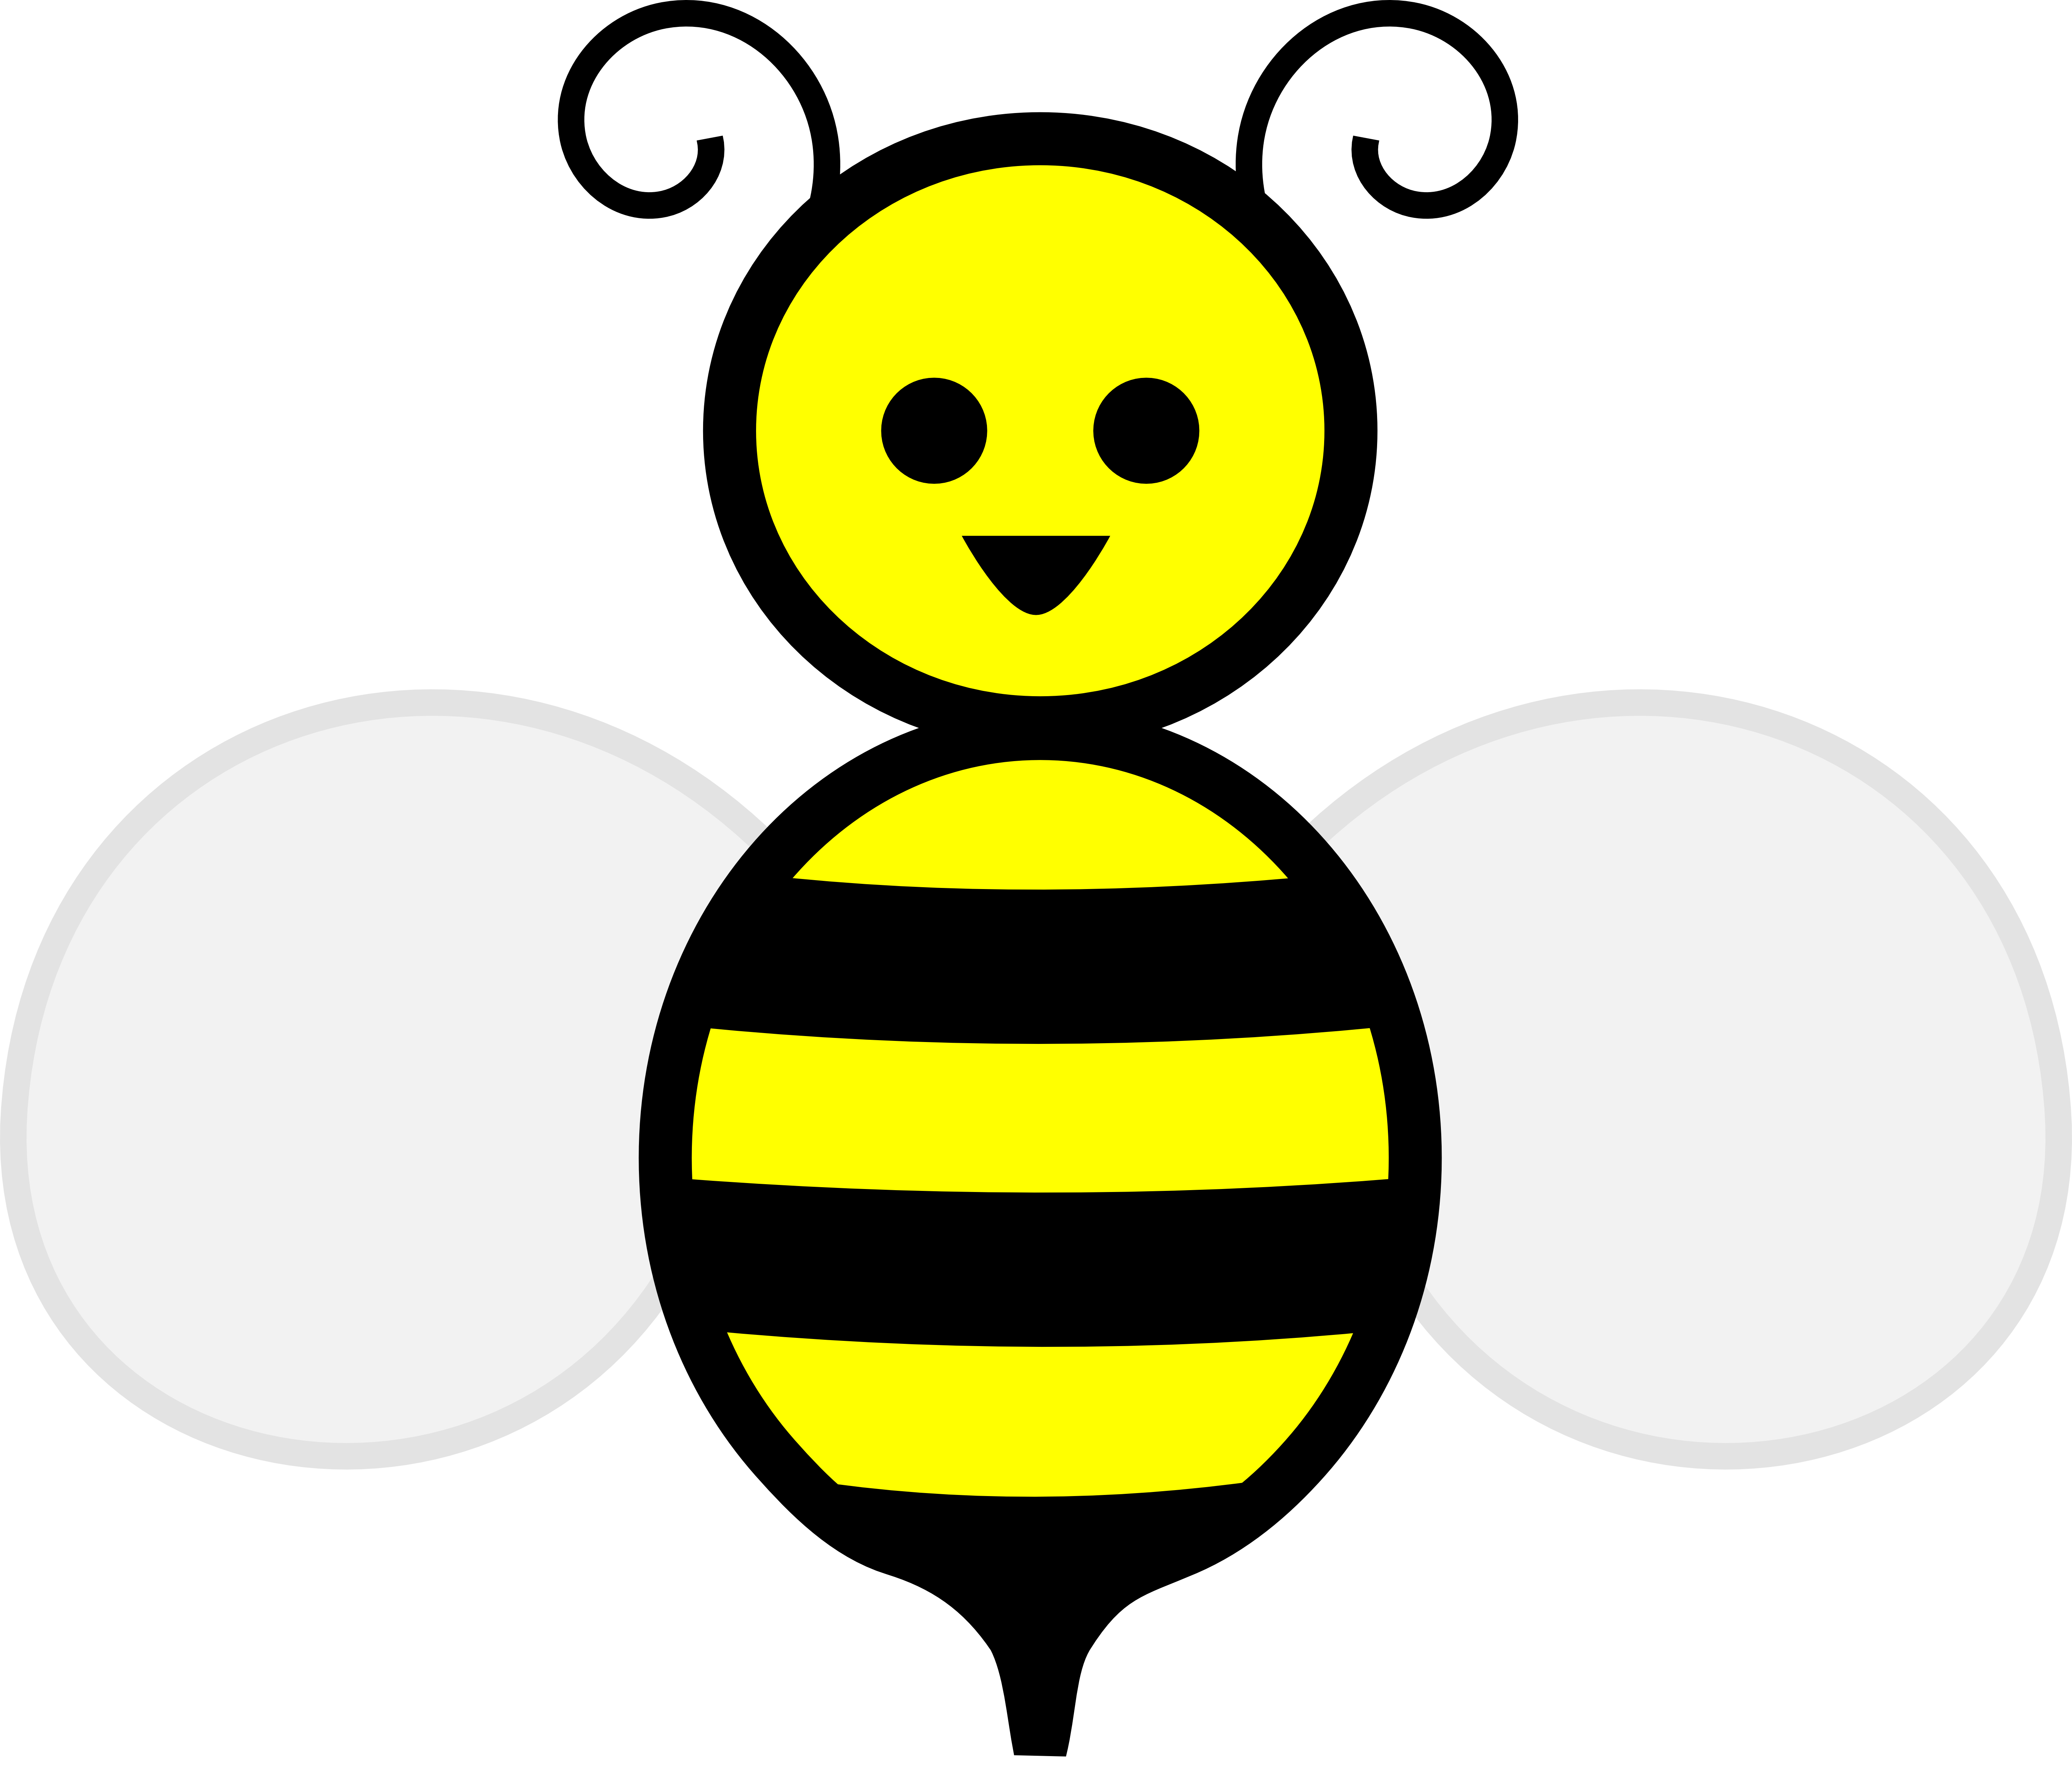 Free Cartoon Bees, Download Free Clip Art, Free Clip Art on.